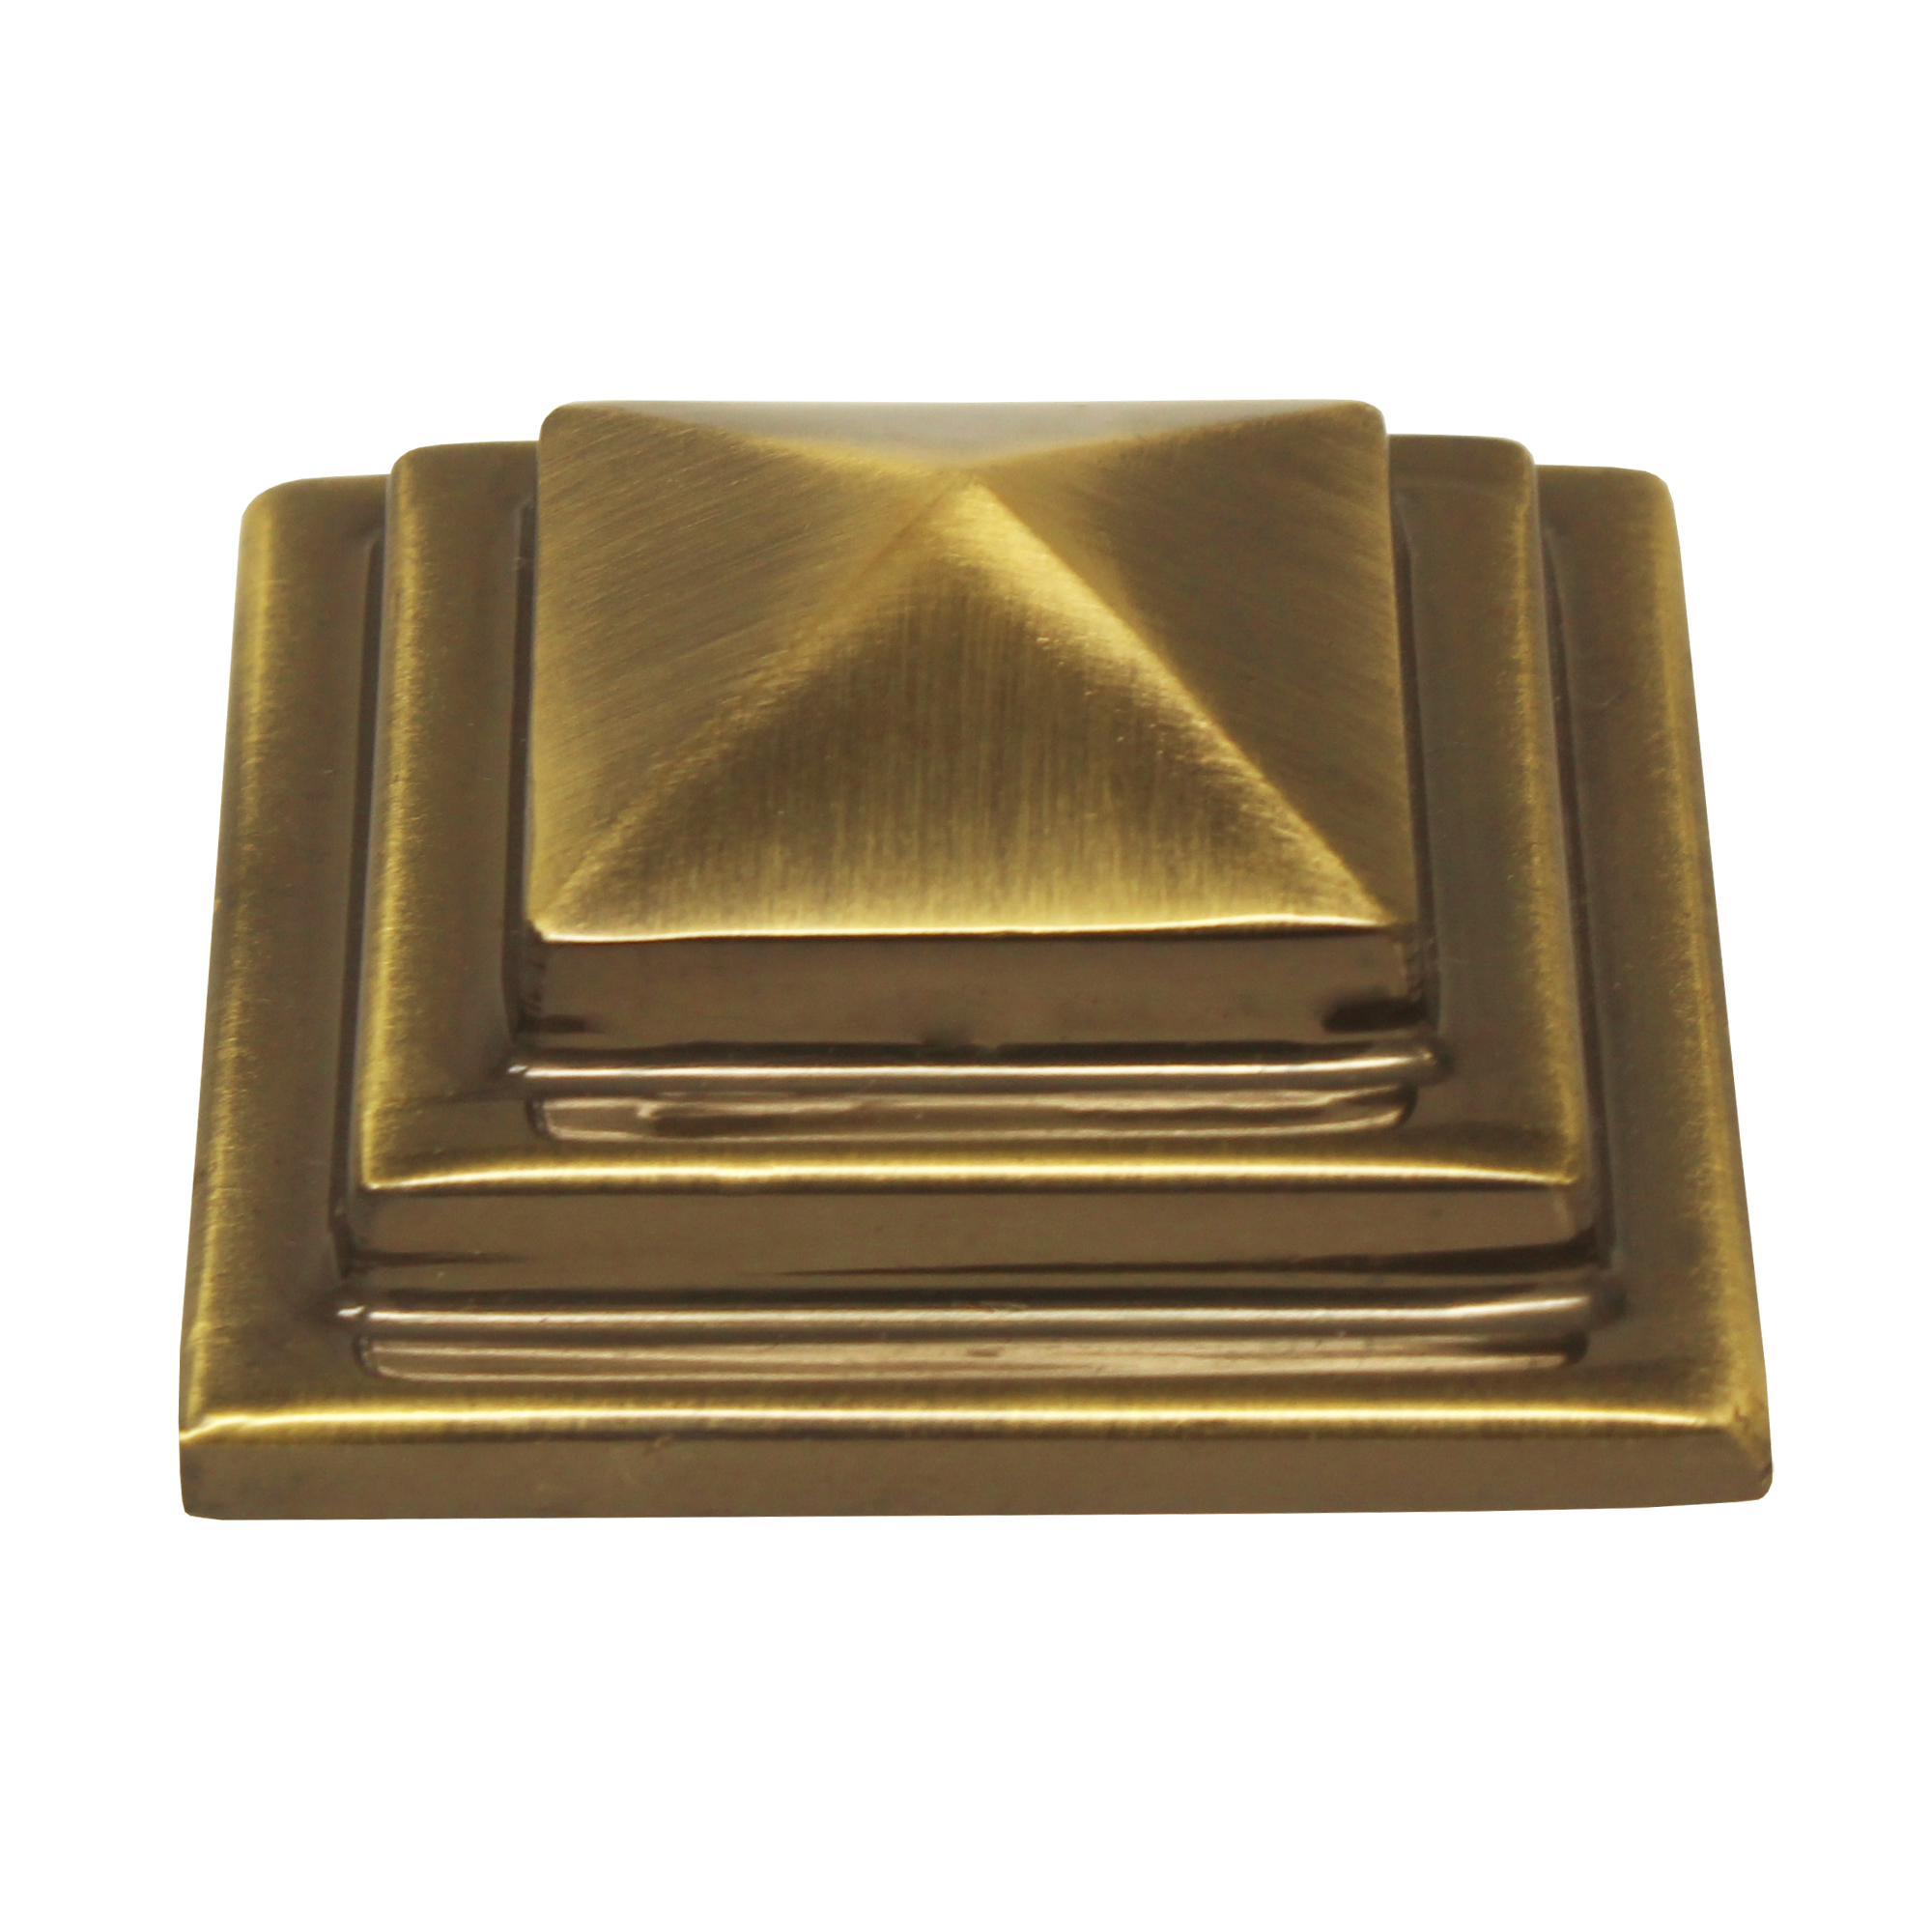 Brass Pyramid Dome Door (1.5 Inch) with Antique Diamond Cut Finish